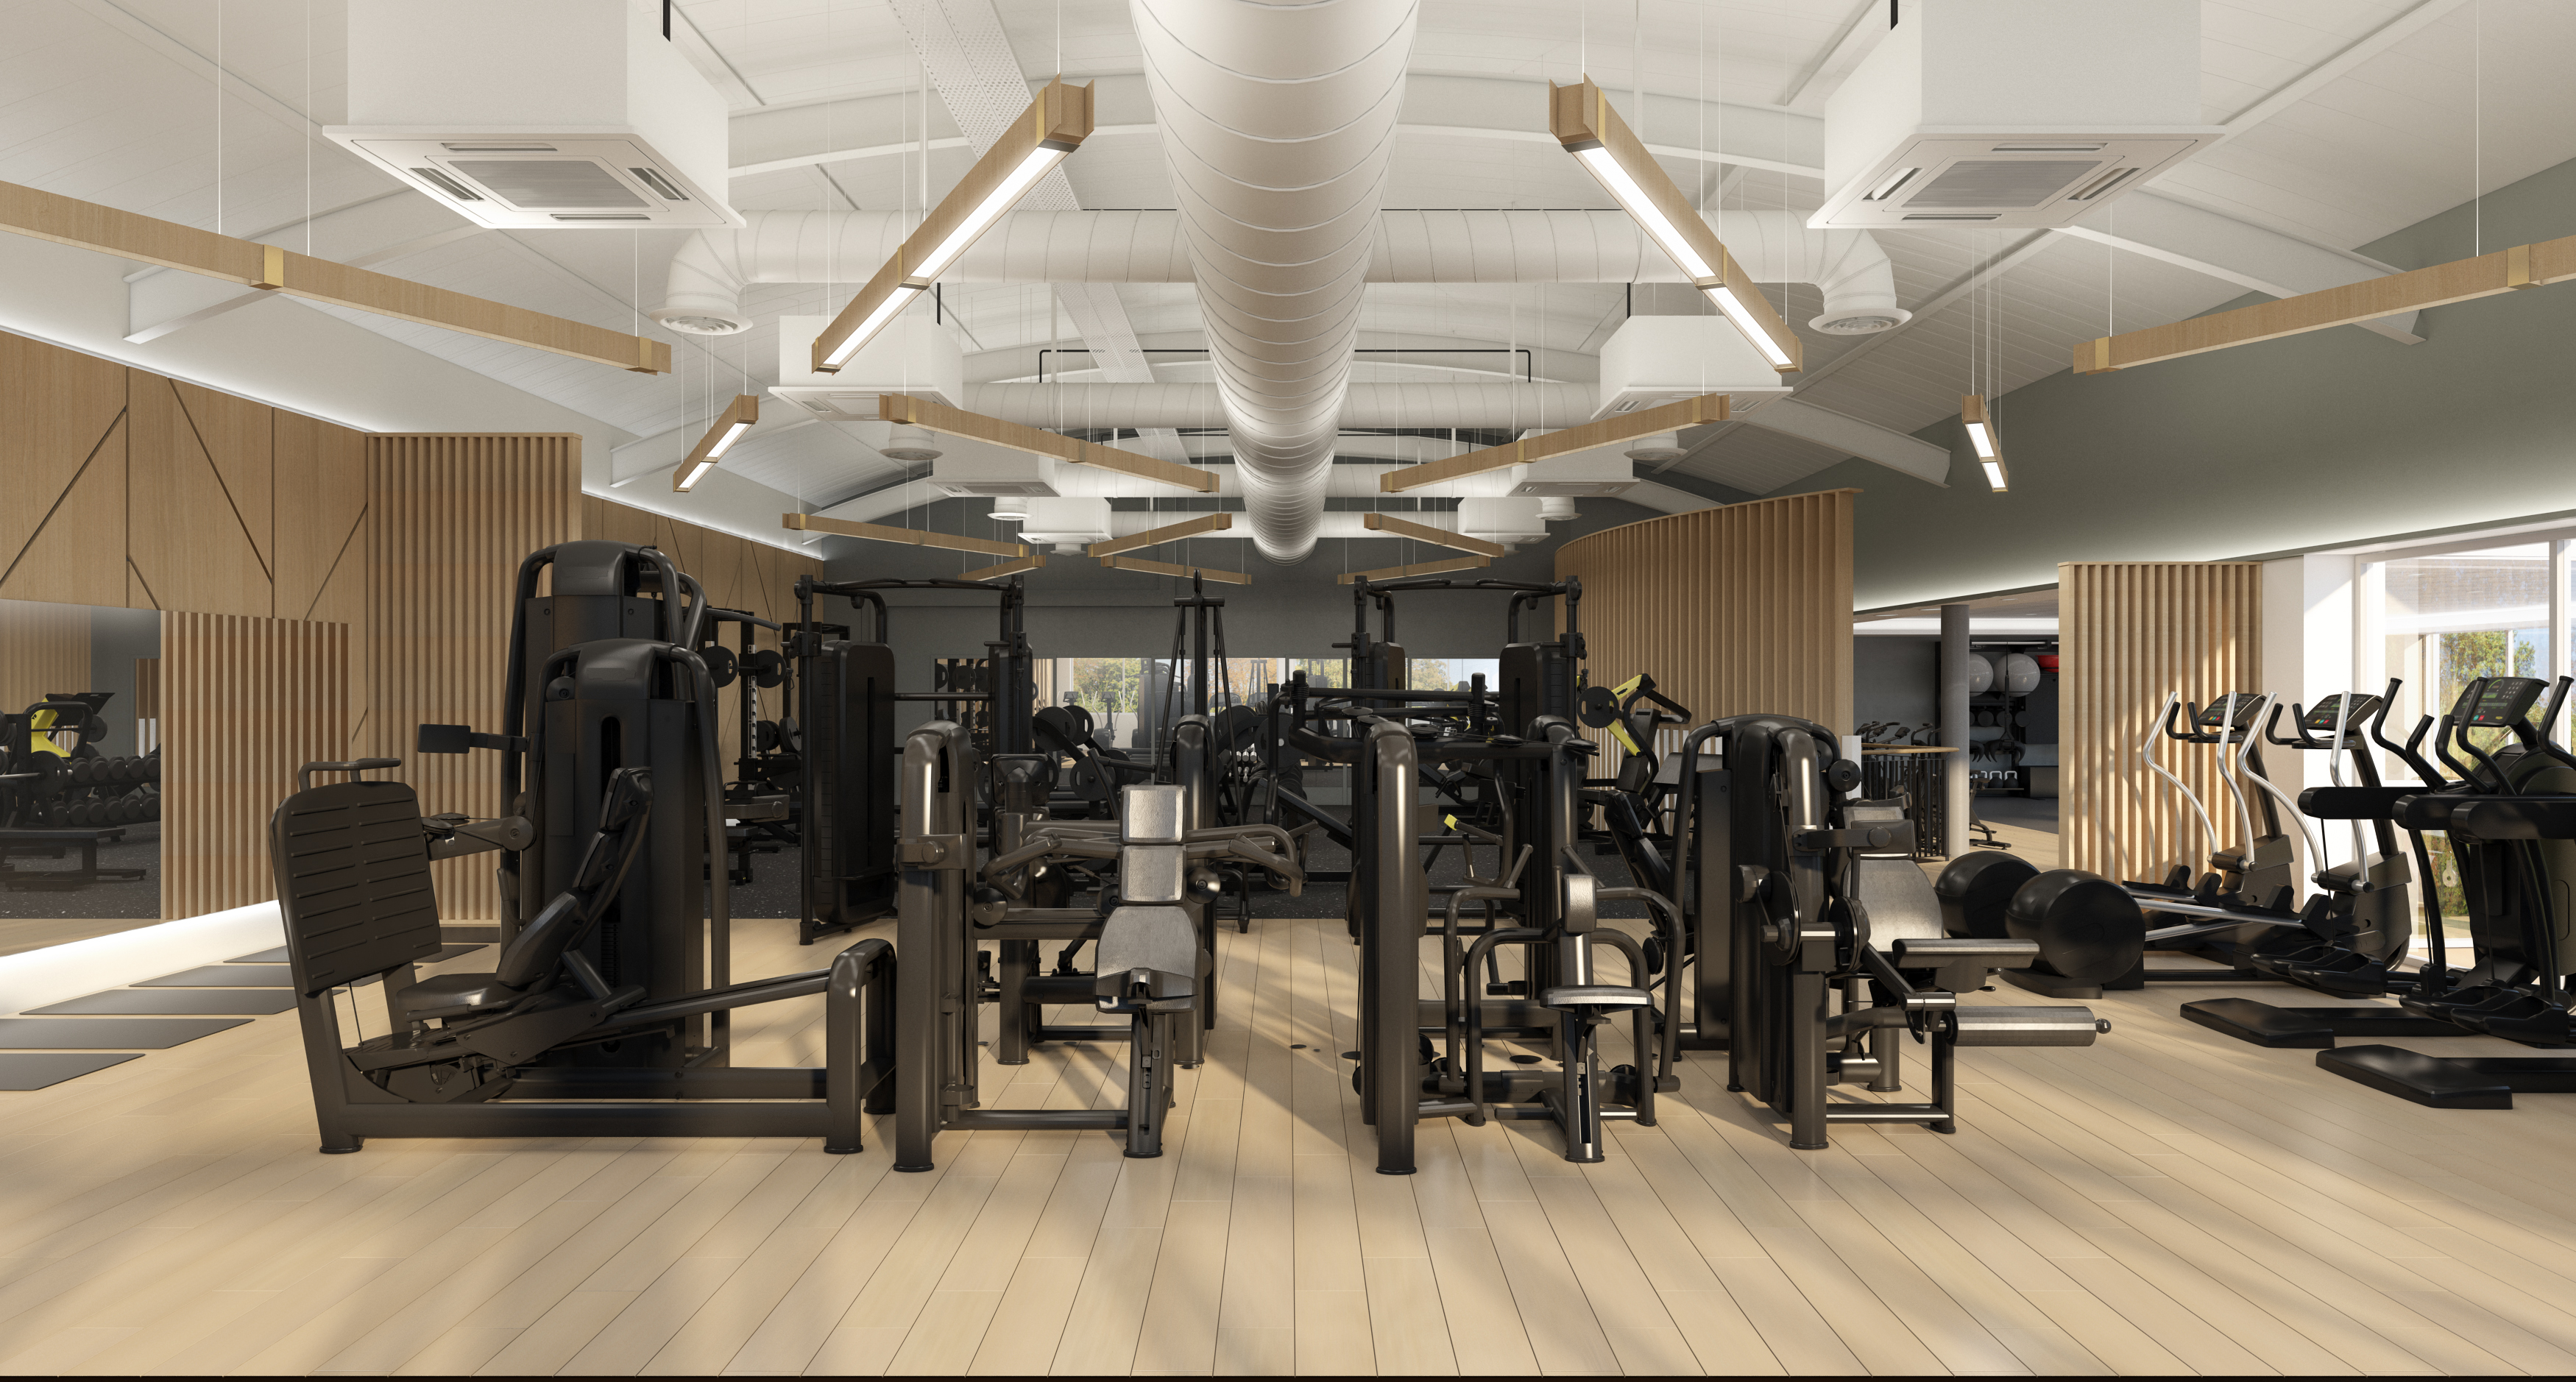 large gym area with fitness equipment